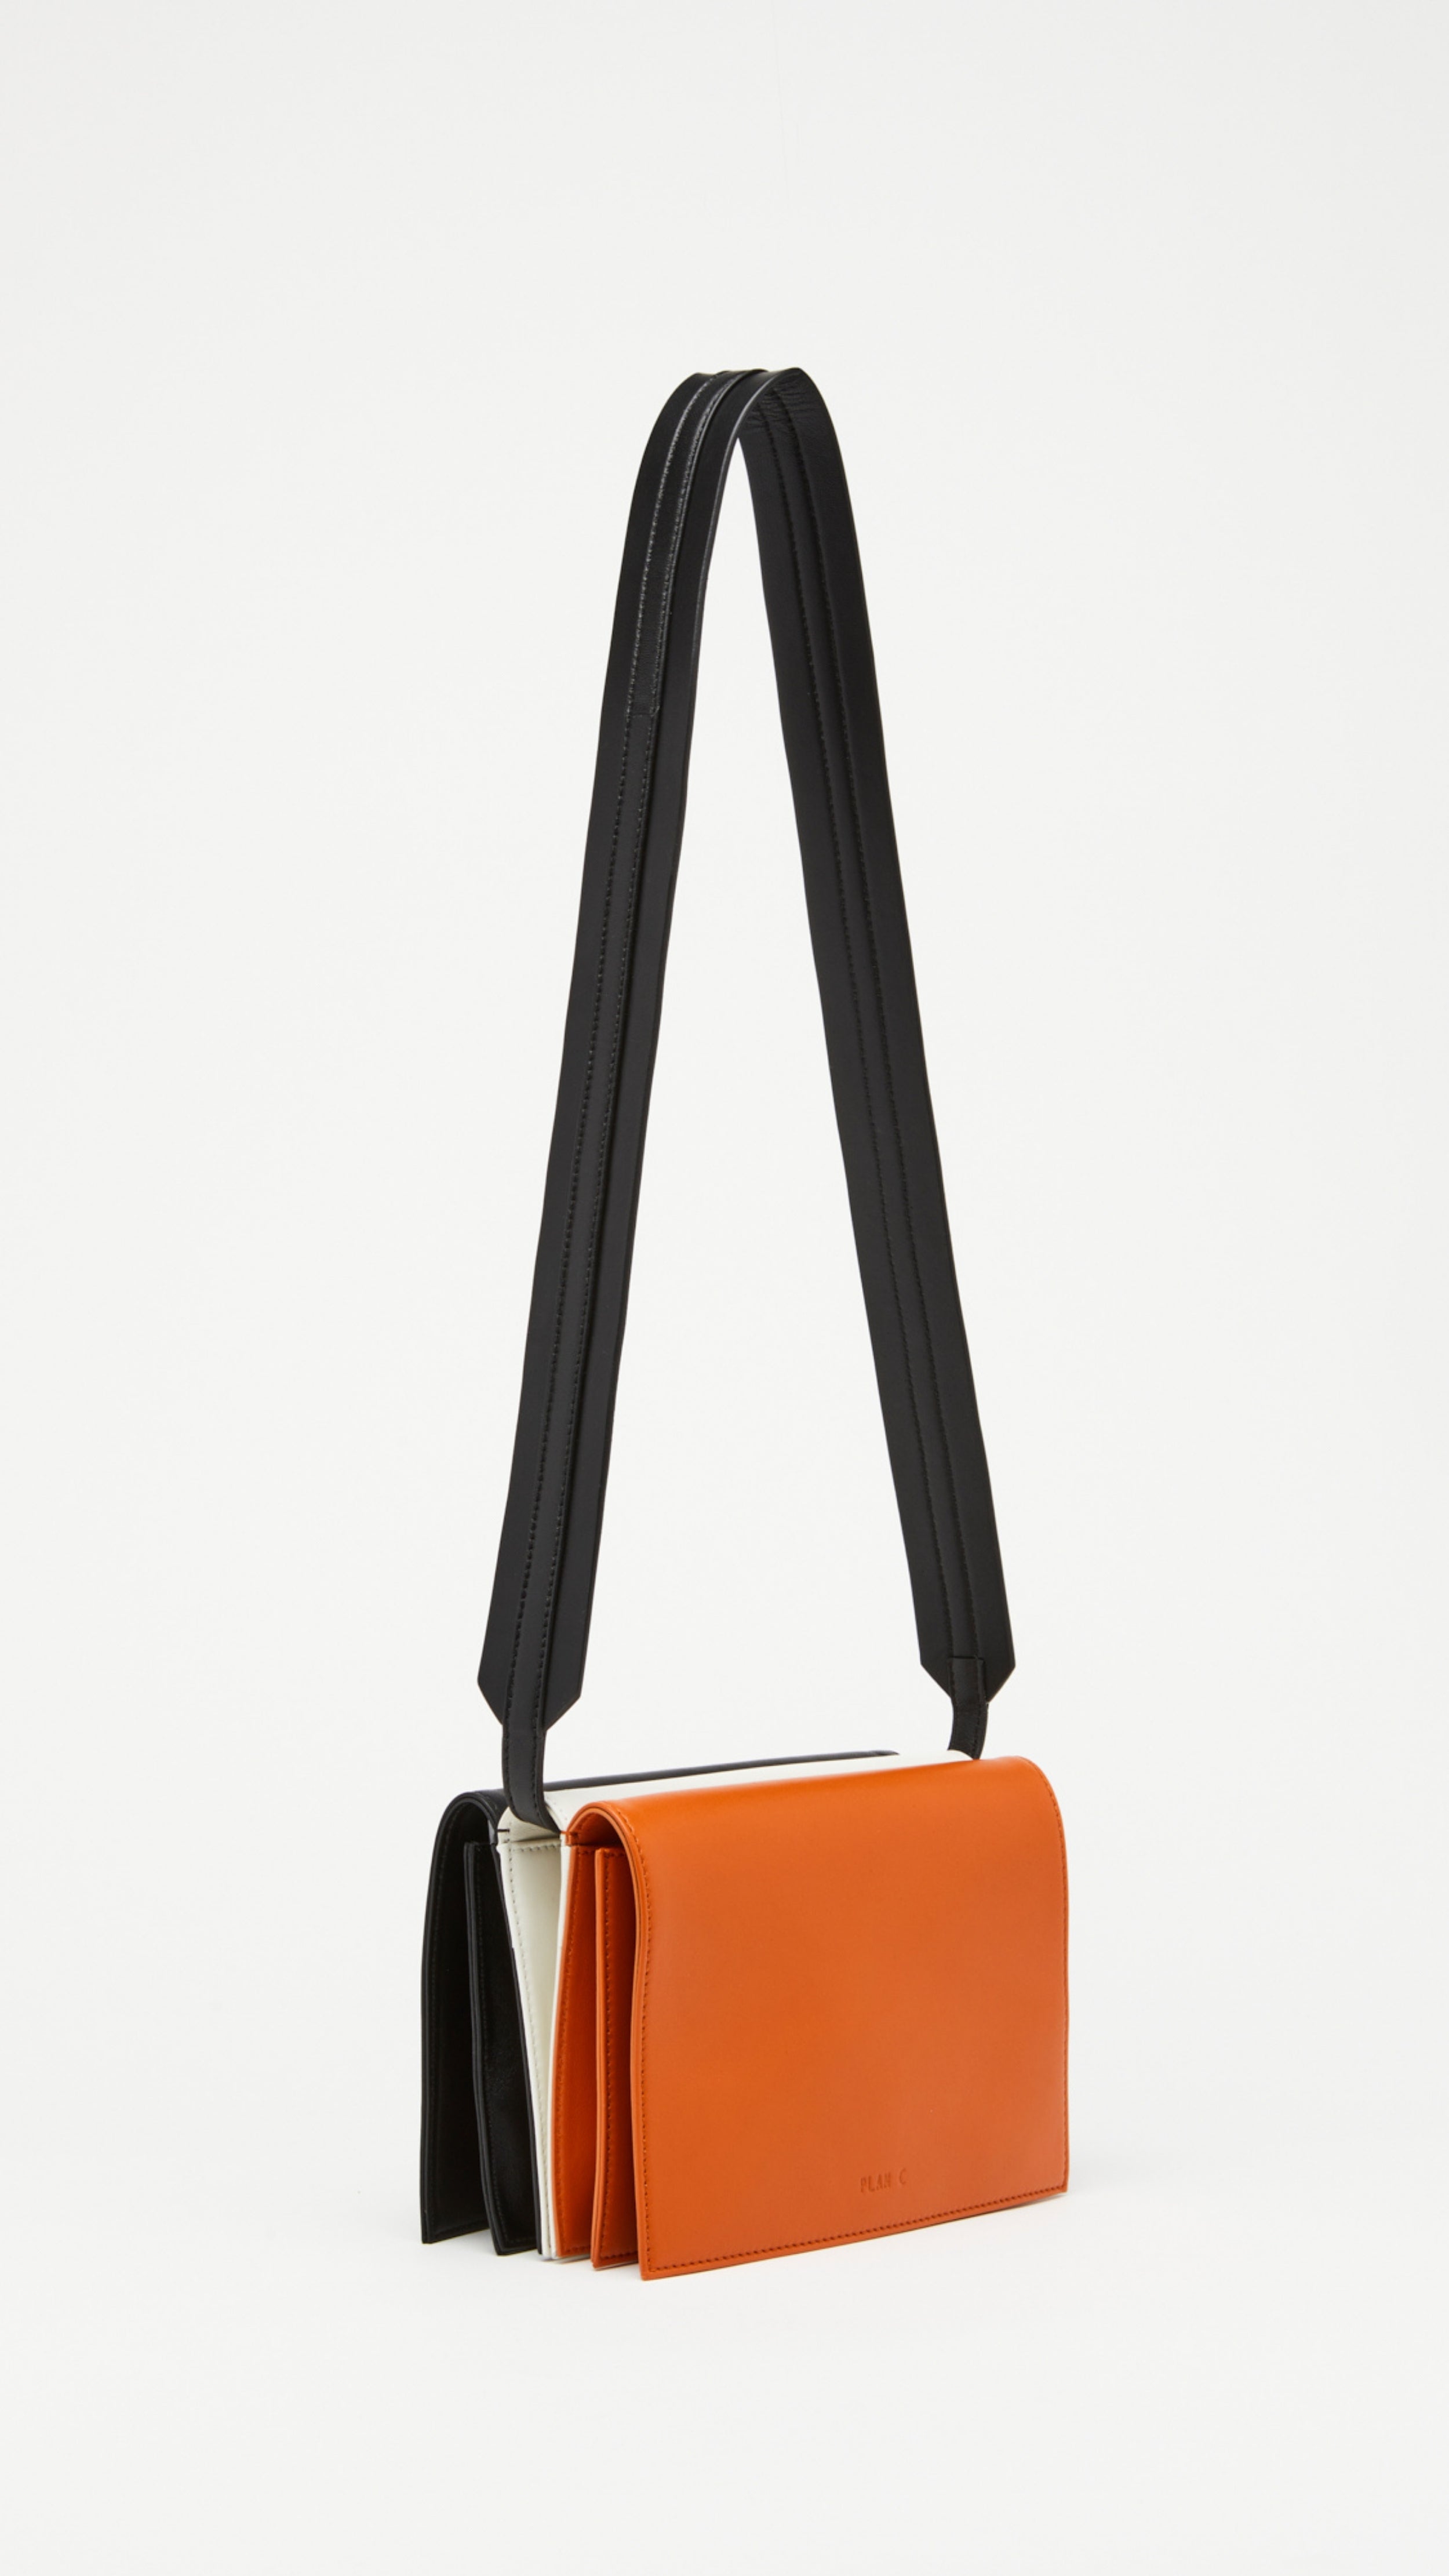 Plan C Tri Color Leather Crossbody Bag. Crafted from fine italian leather in black, white and camel. It has an adjustable black strap. Product shown from front side.